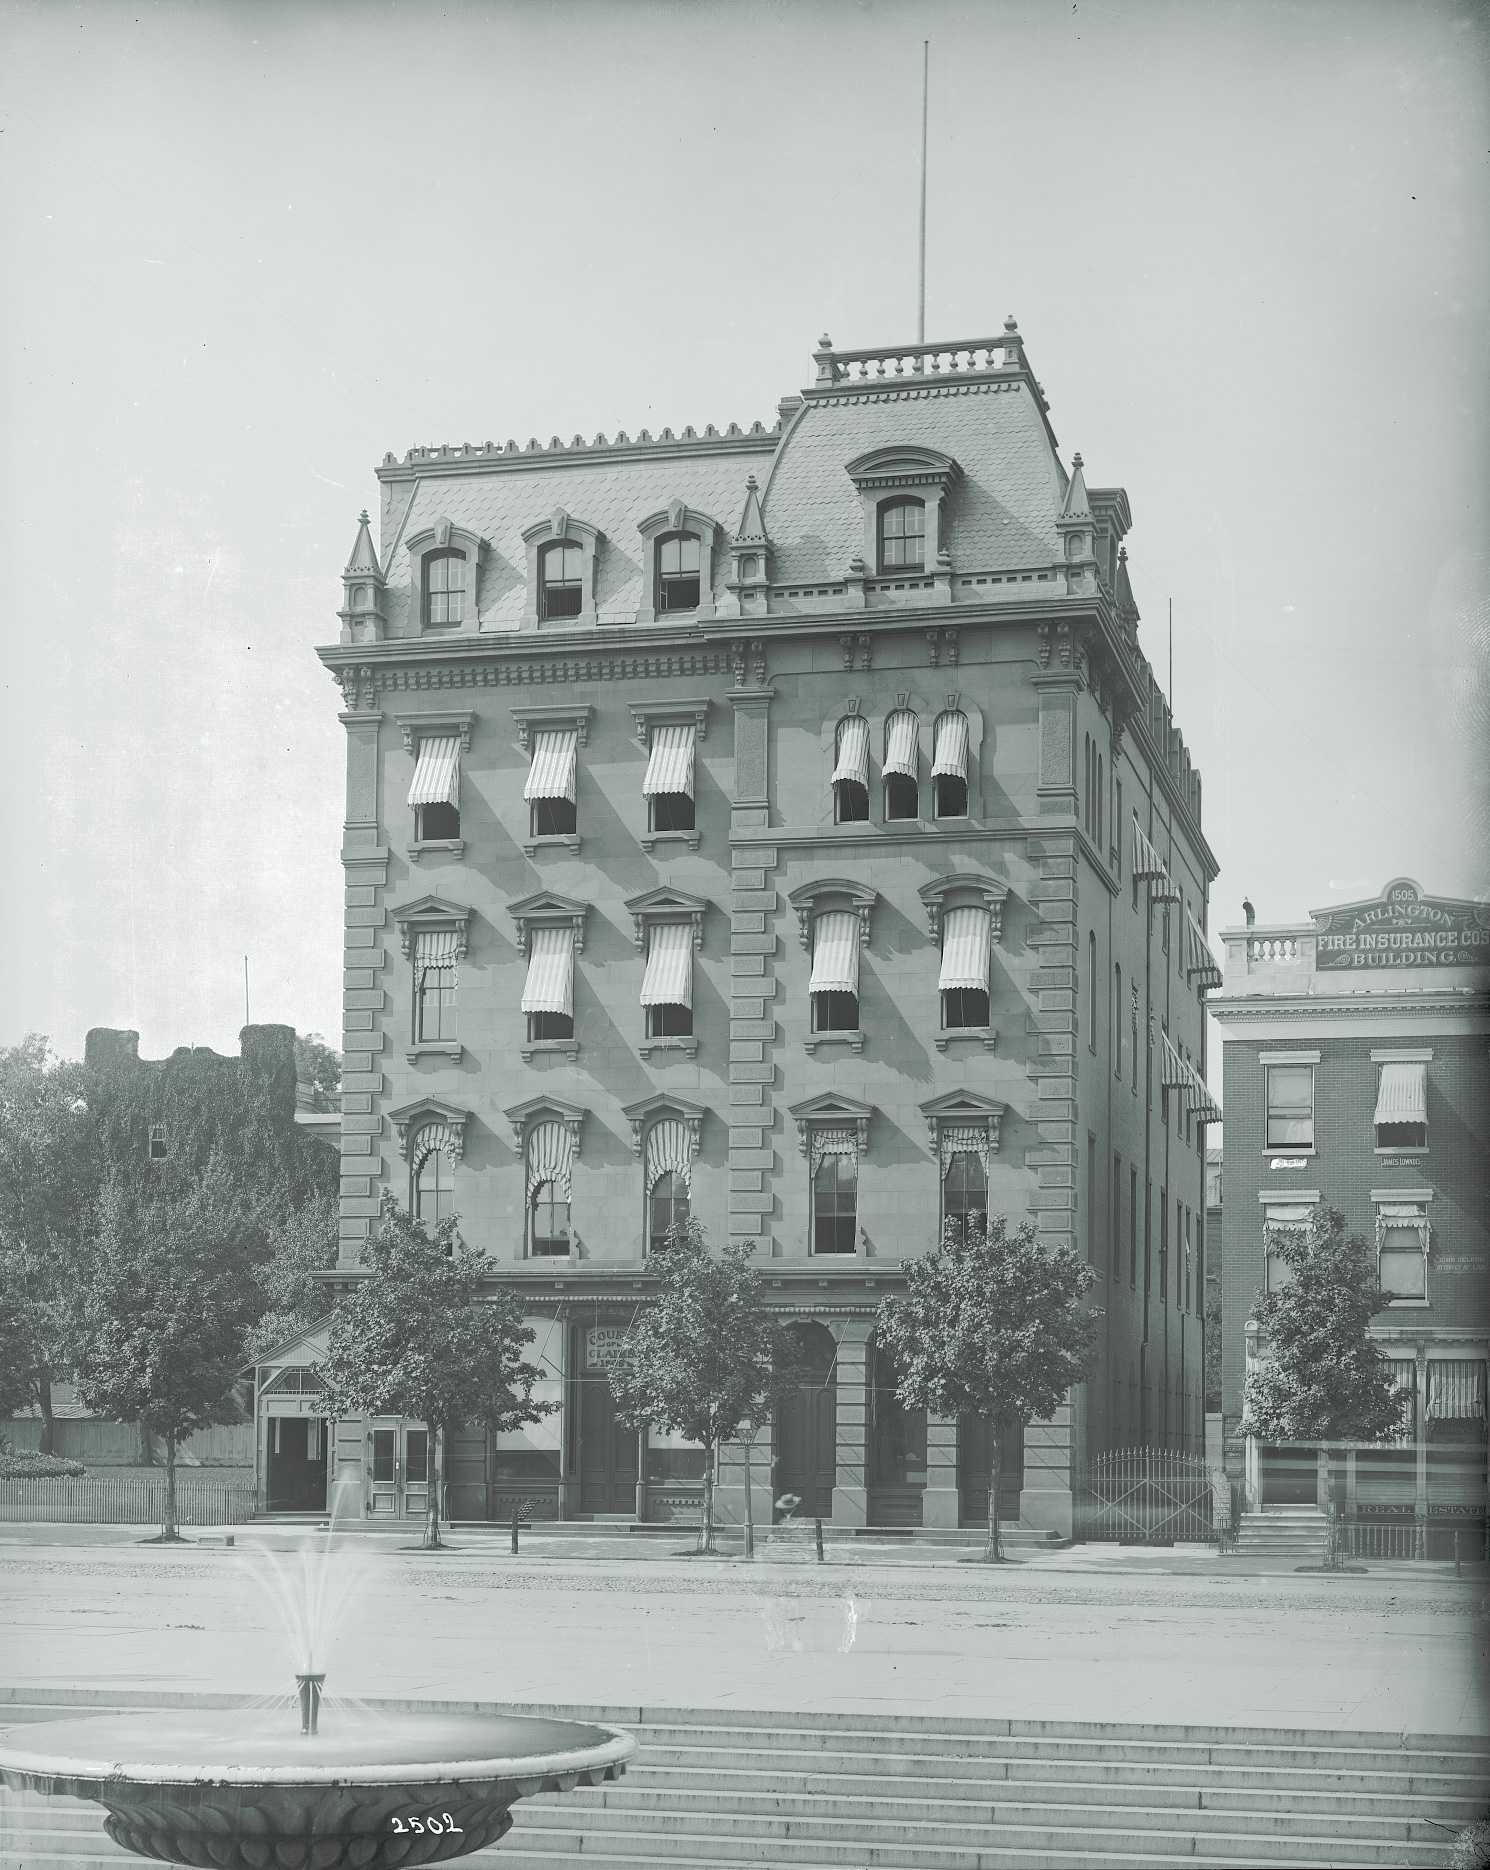 A black and white photograph of Freedman’s Savings and Trust Company building in Washington, D.C.